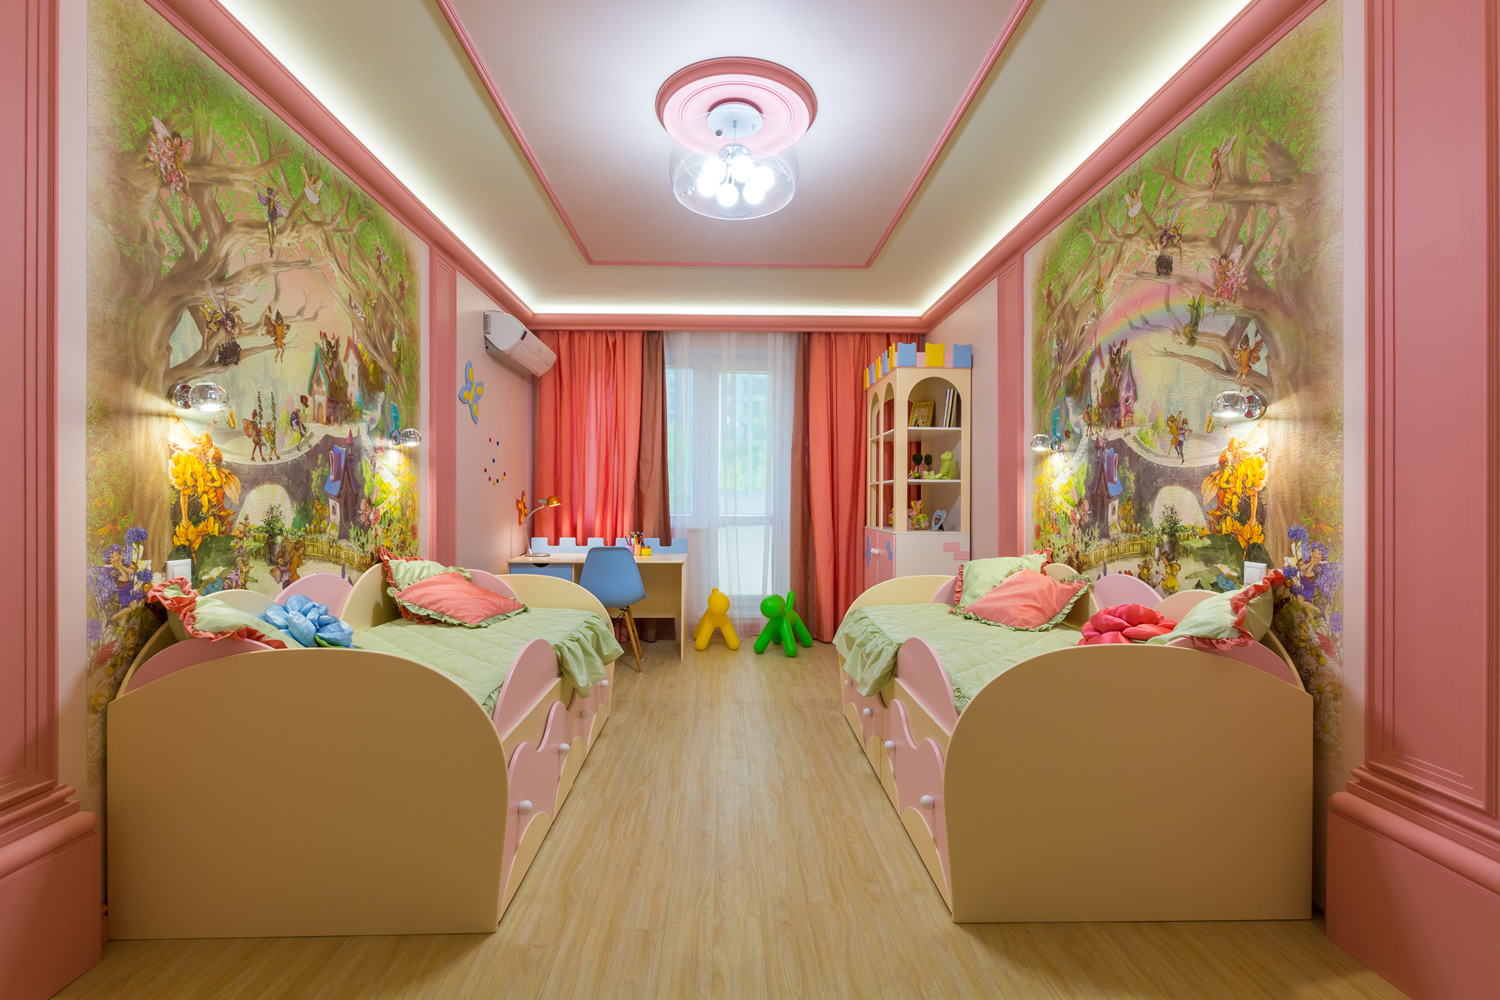 Children's room in a modern style